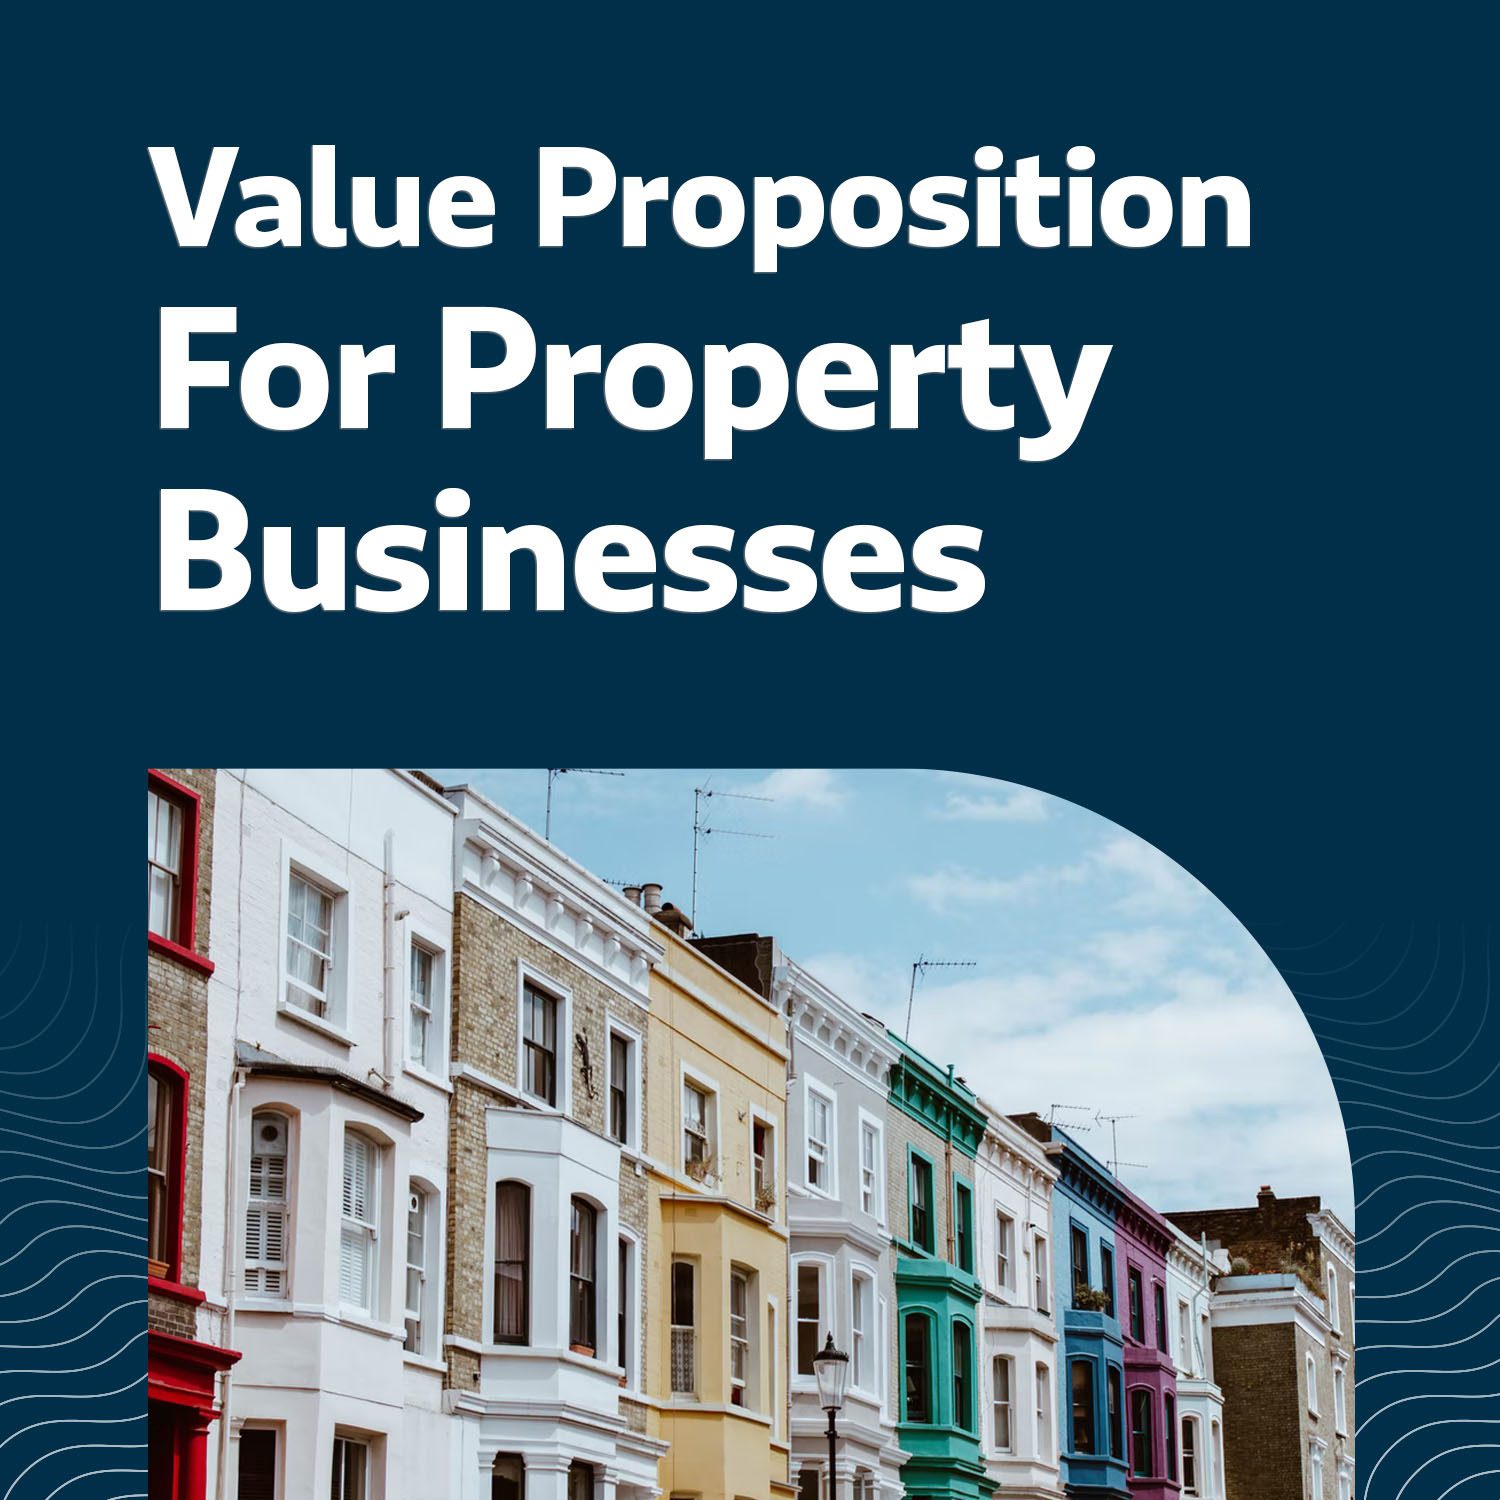 Property Business Value Proposition